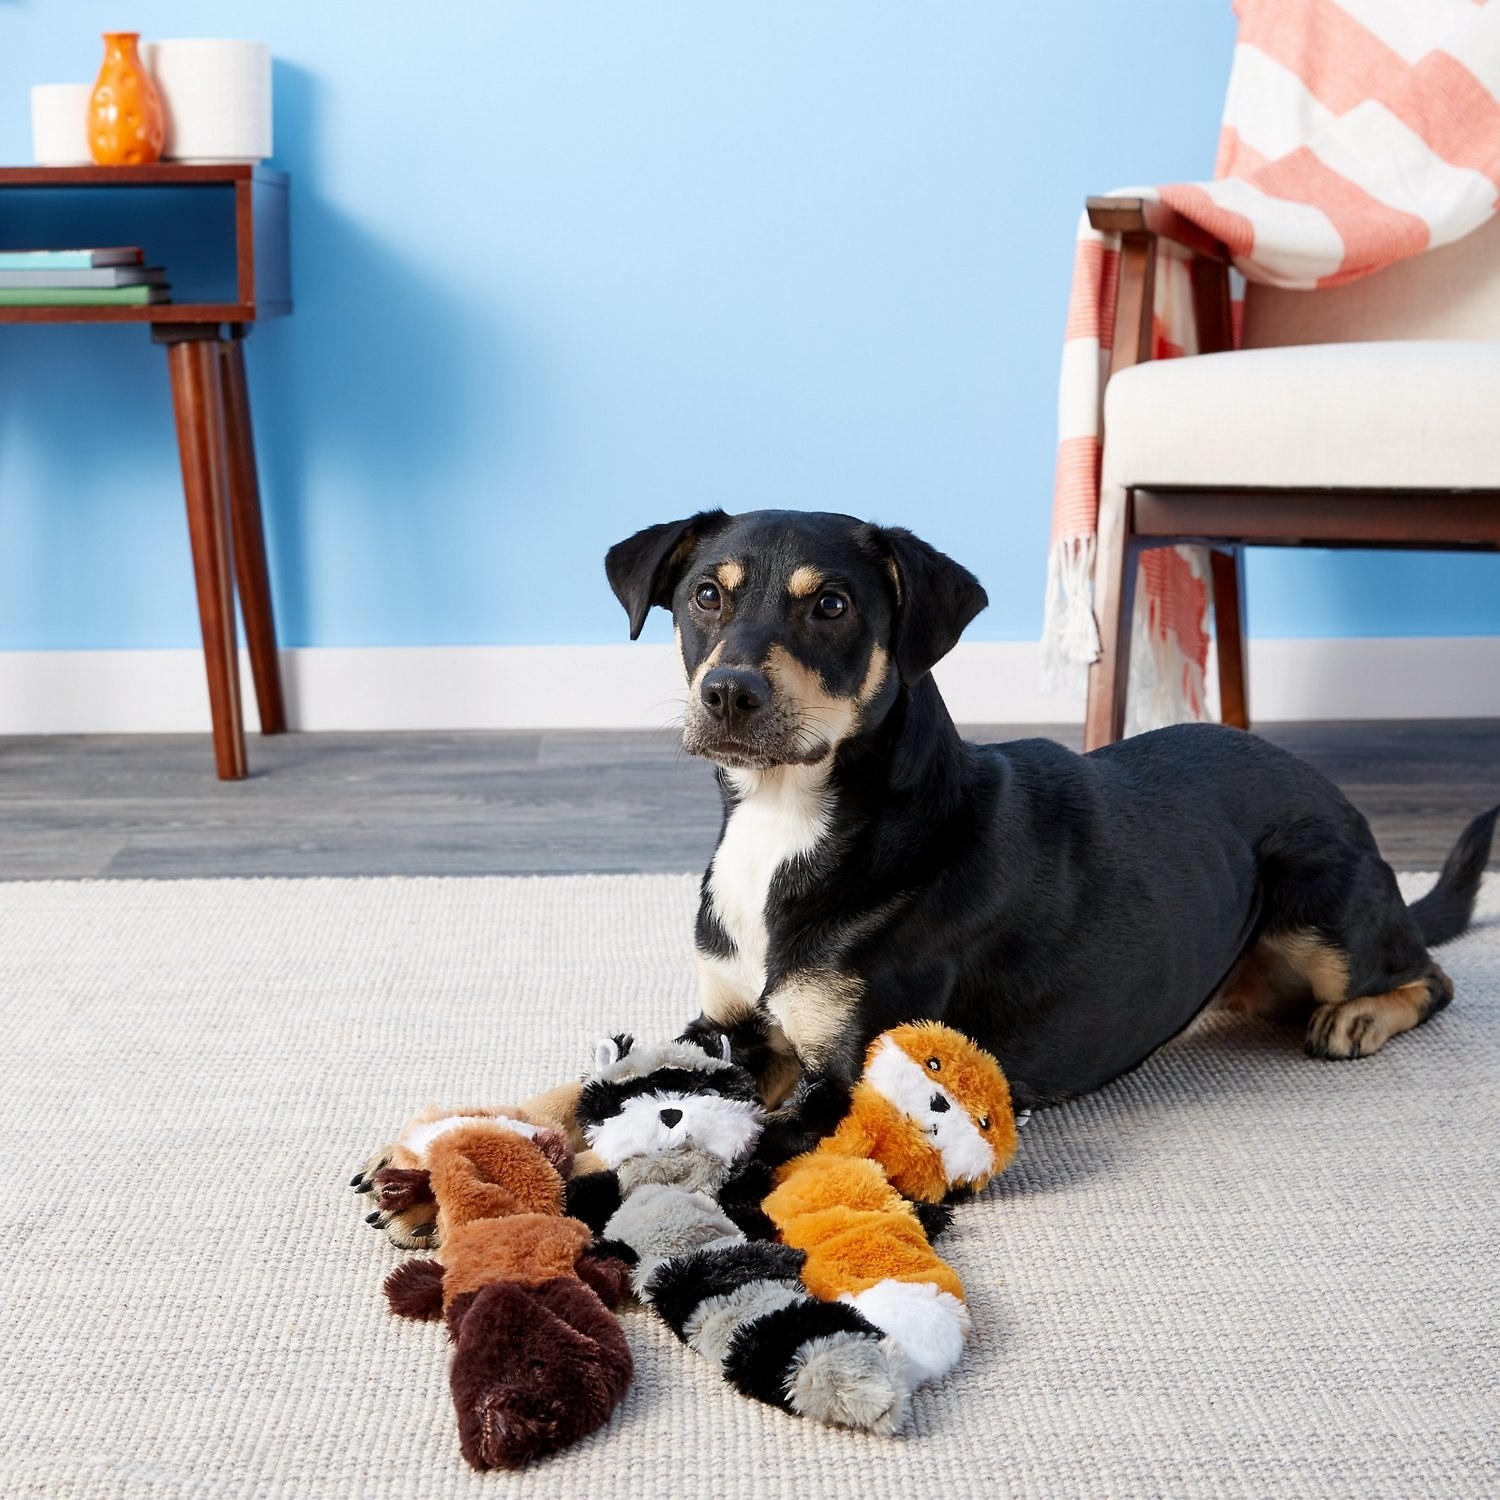 a dog posing with the three toys